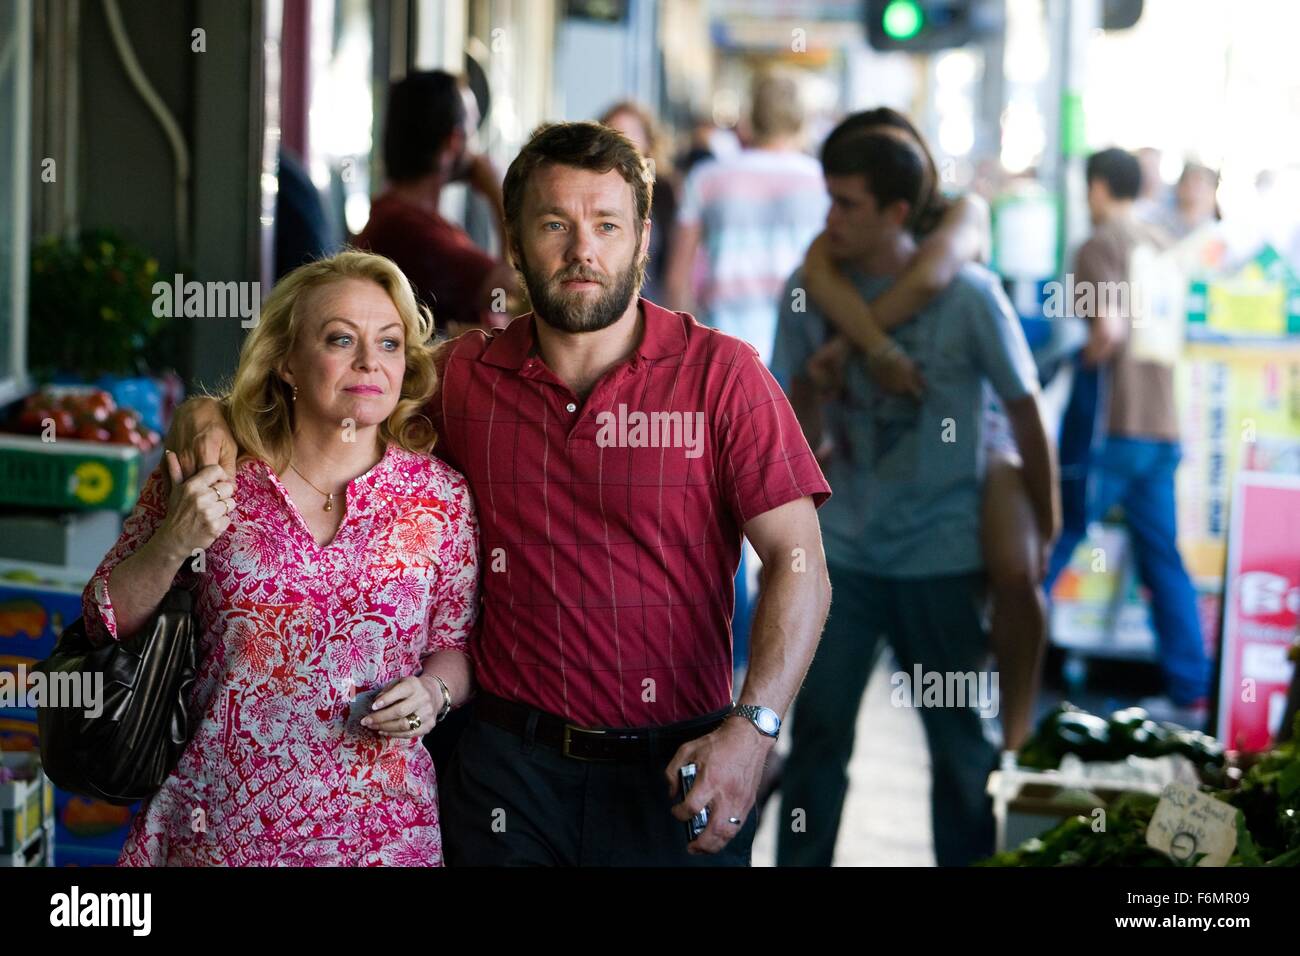 RELEASE DATE: 13 August 2010. MOVIE TITLE: Animal Kingdom. STUDIO: Porchlight Films. PLOT: Tells the story of seventeen year-old J (Josh) as he navigates his survival amongst an explosive criminal family and the detective who thinks he can save him. PICTURED: JACKI WEAVER as Janine Cody and JOEL EDGERTON as Barry Brown. Stock Photo